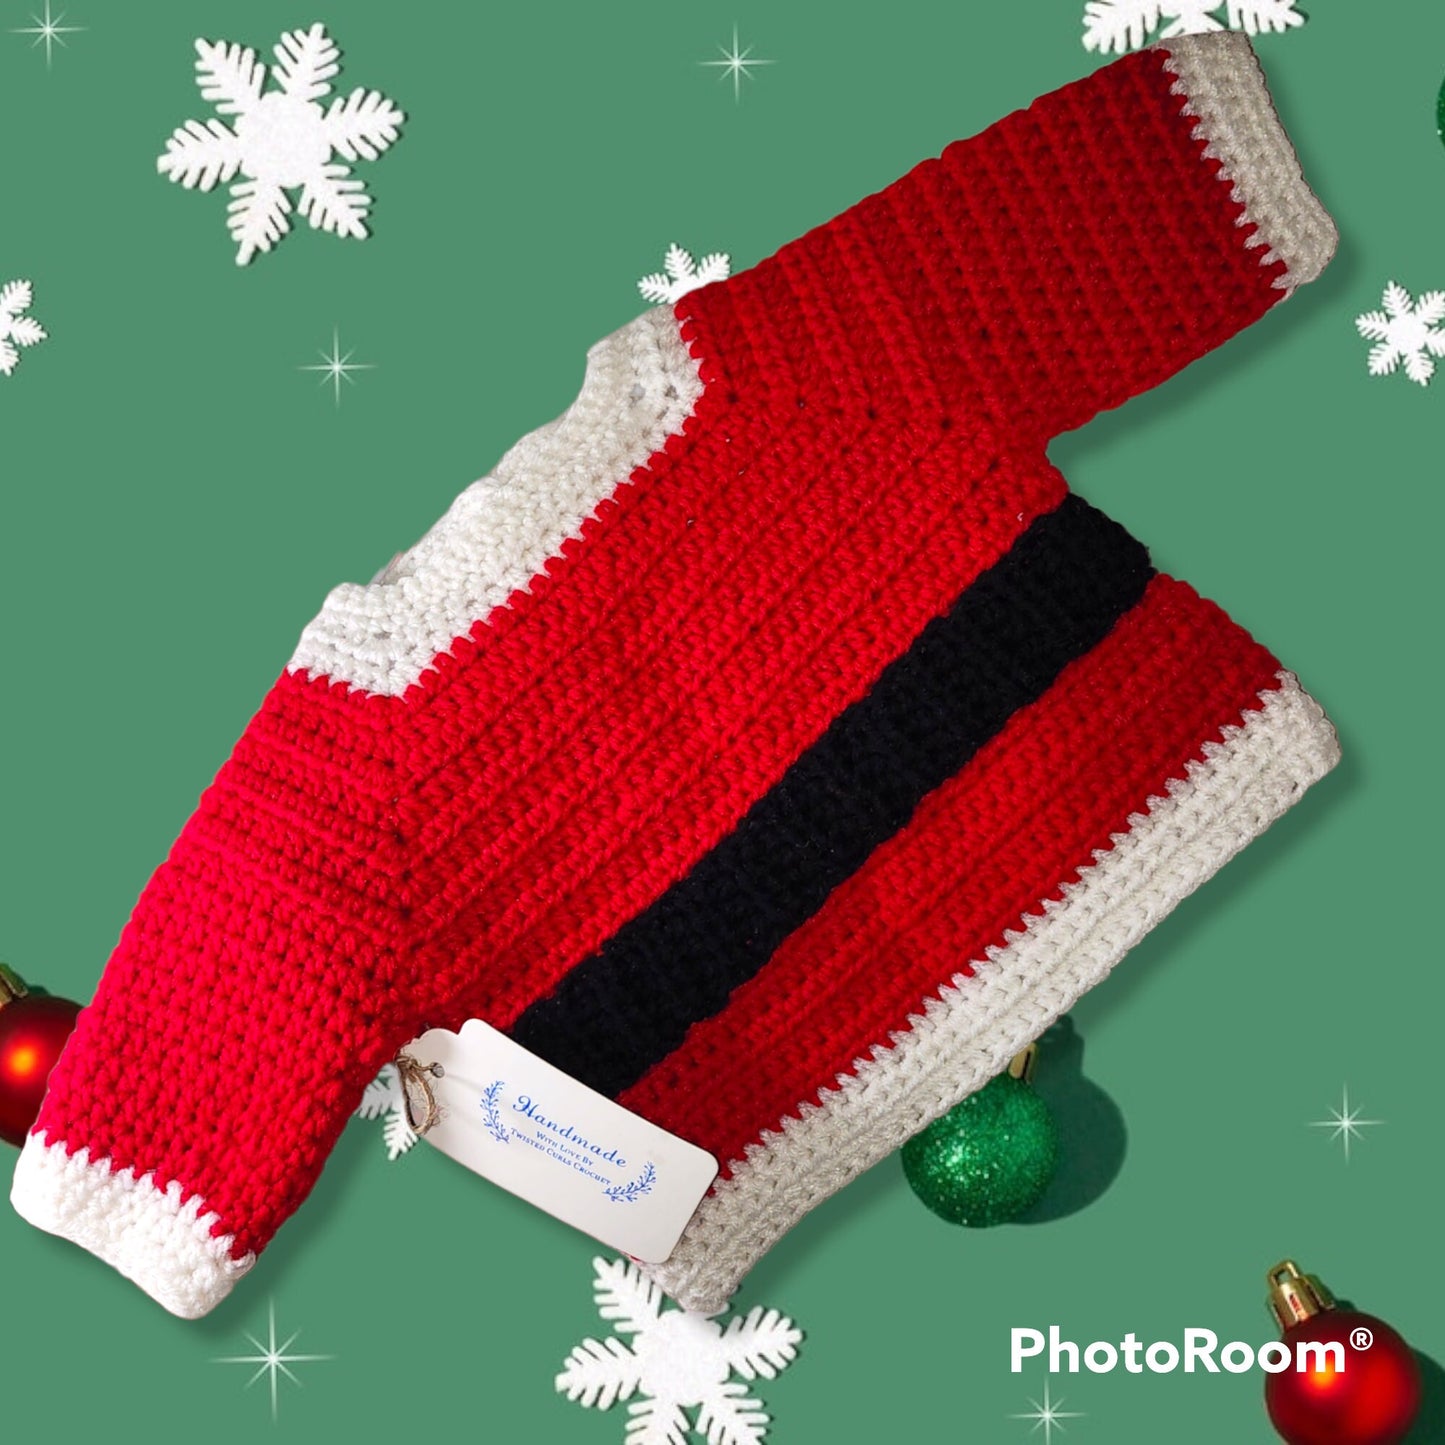 Handmade 3 to 6 months  baby Santa suit